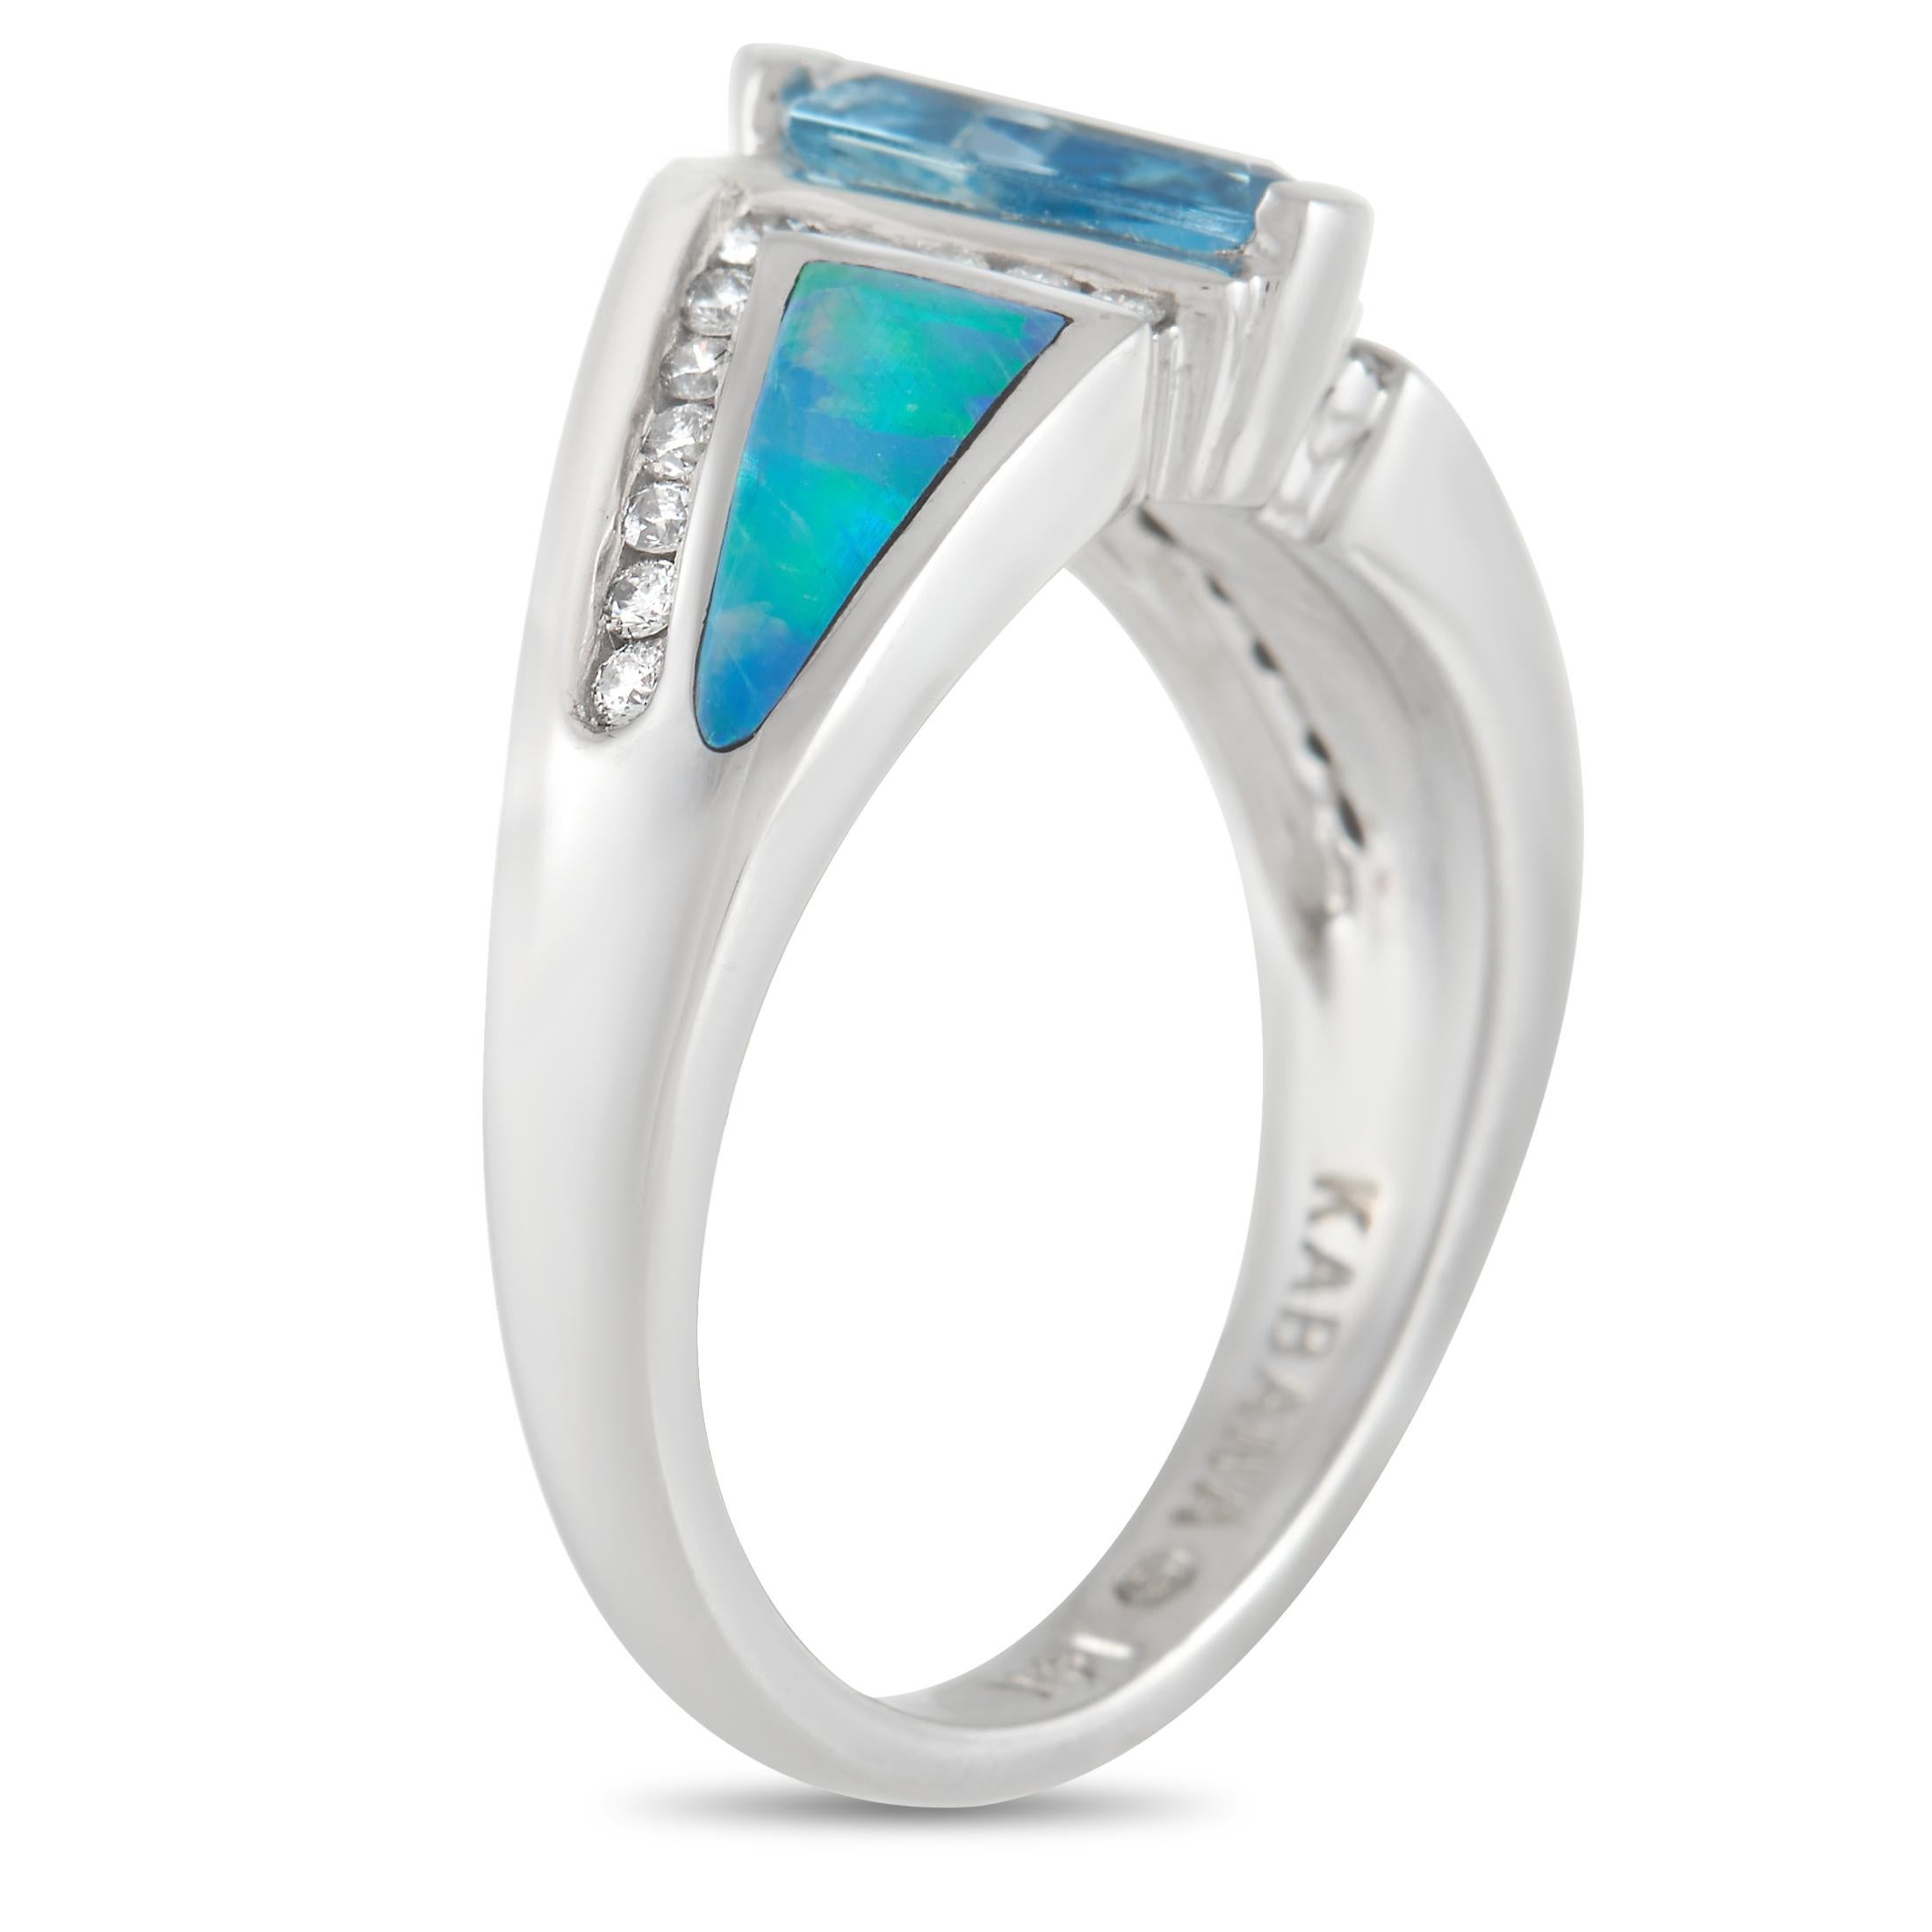 You’ve never seen anything quite as striking as this ring from Kabana. The 14K White Gold setting’s geometric design comes to life thanks to the 0.90 carat Aquamarine center stone. Adorned with diamond accents and inlaid opal, this piece features a